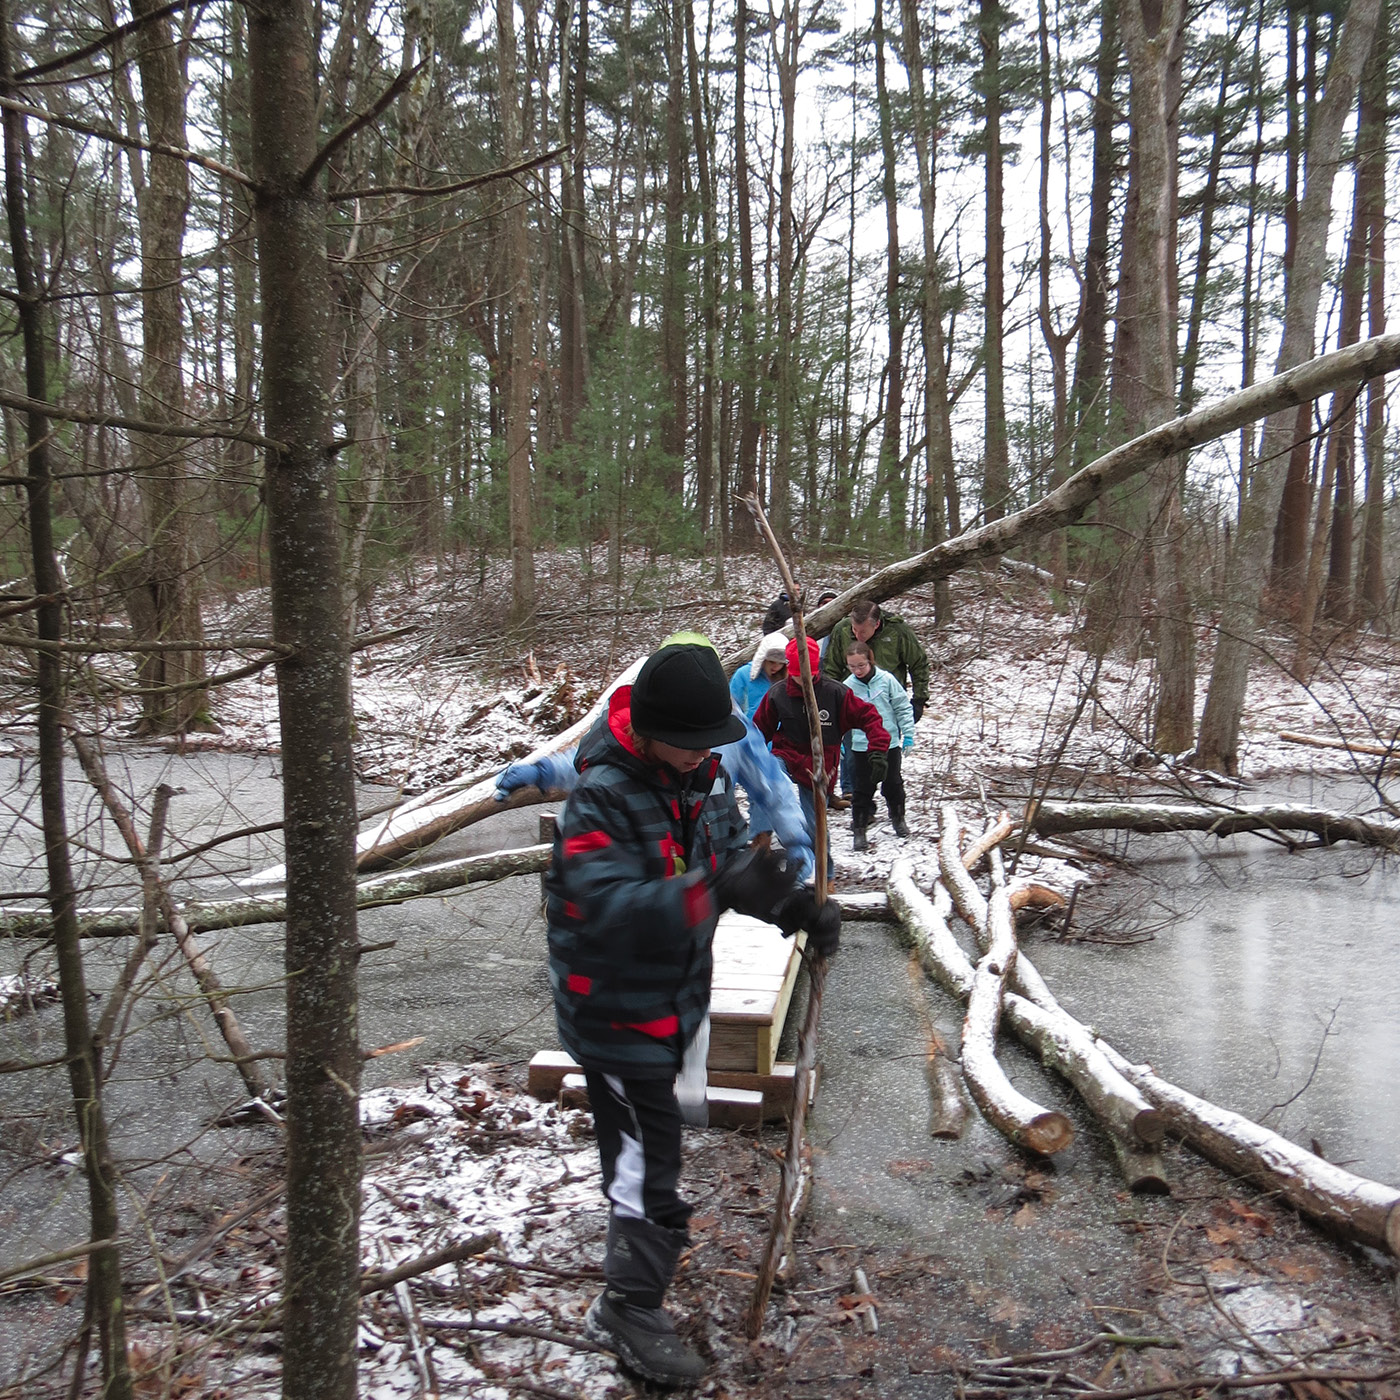 Students and their families braved the cold for a weekend hike in the swamp.